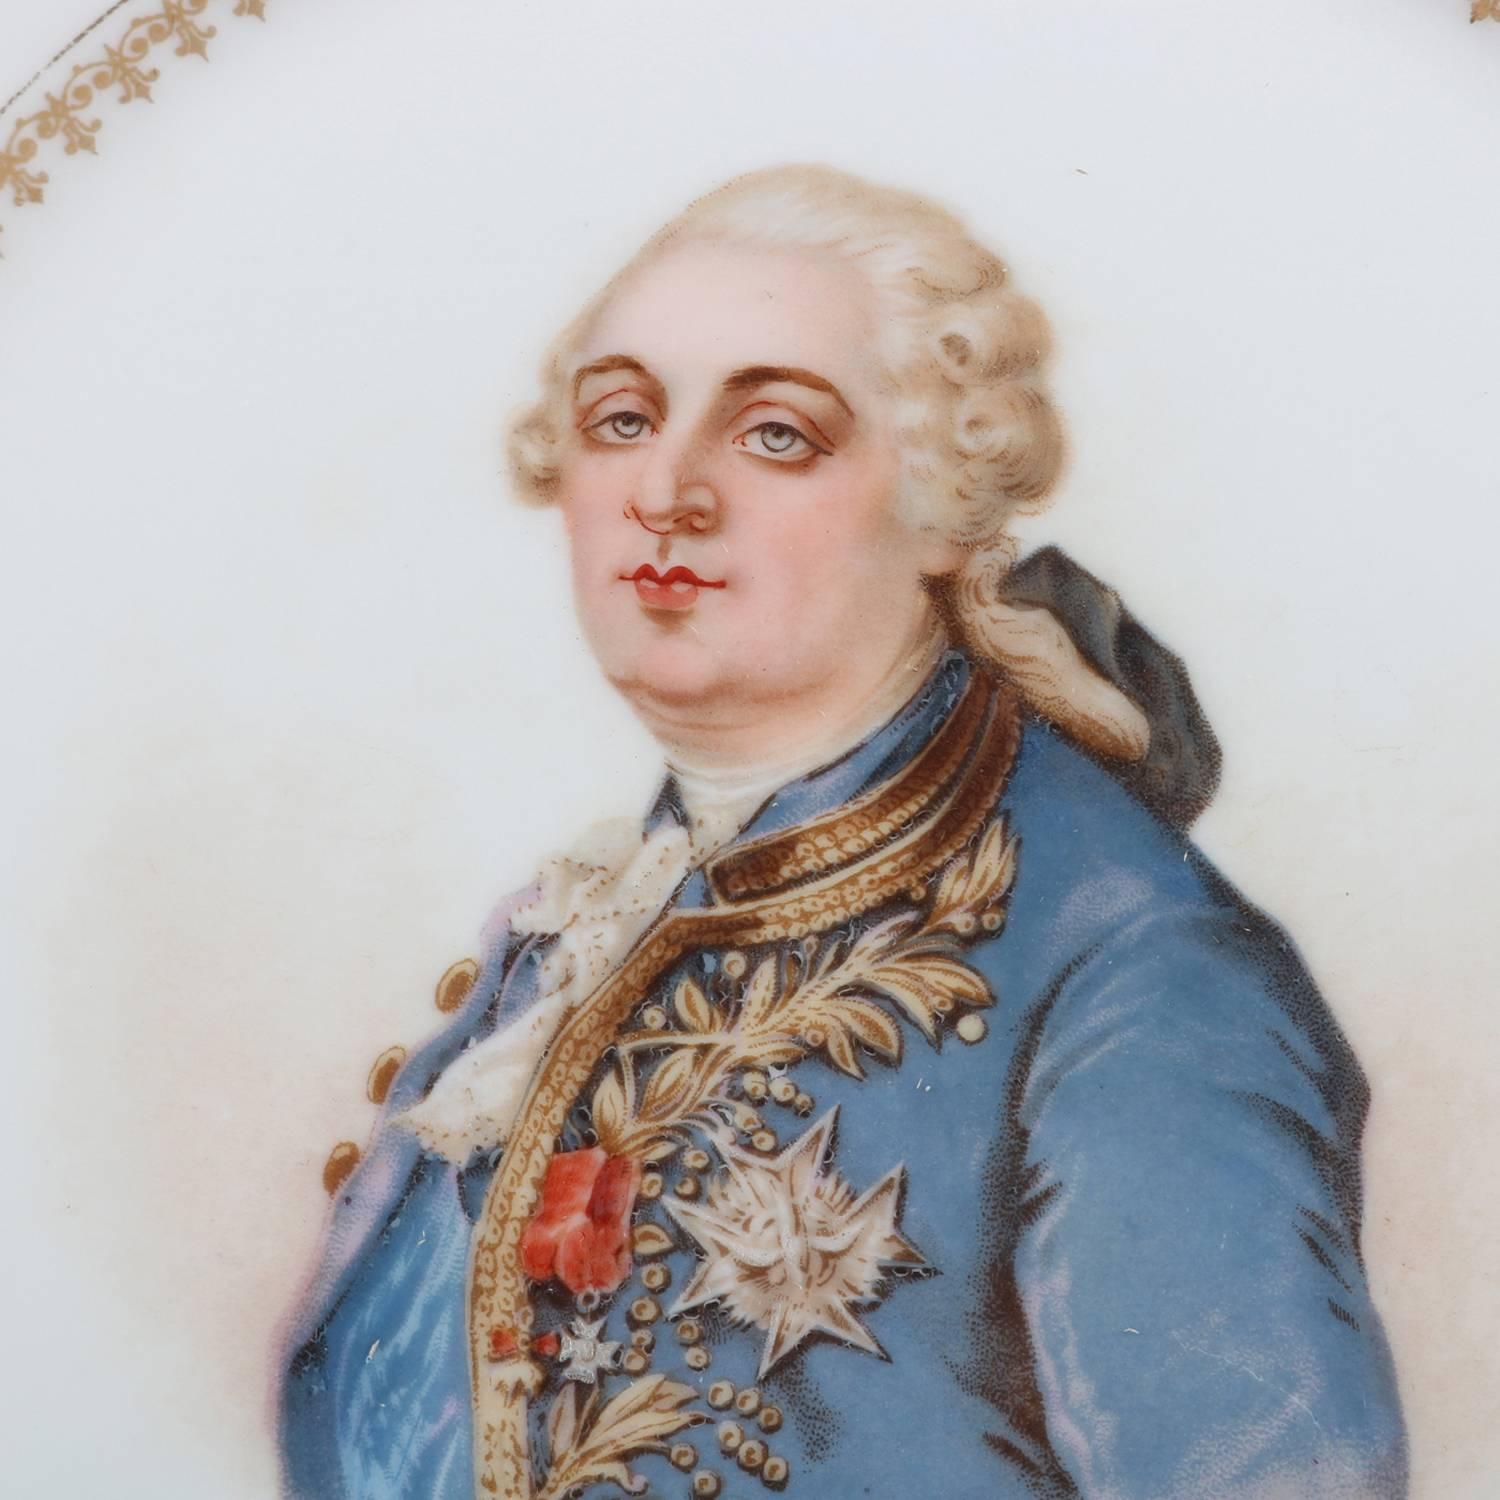 Antique French portrait plate by Sevres for Chateau de St Cloud features well with central artist signed portrait of Louis XVI by Debrie and framed with gilt repeating and stylized fleur-de-lis pattern, rim with gilt scalloped edges and decorated